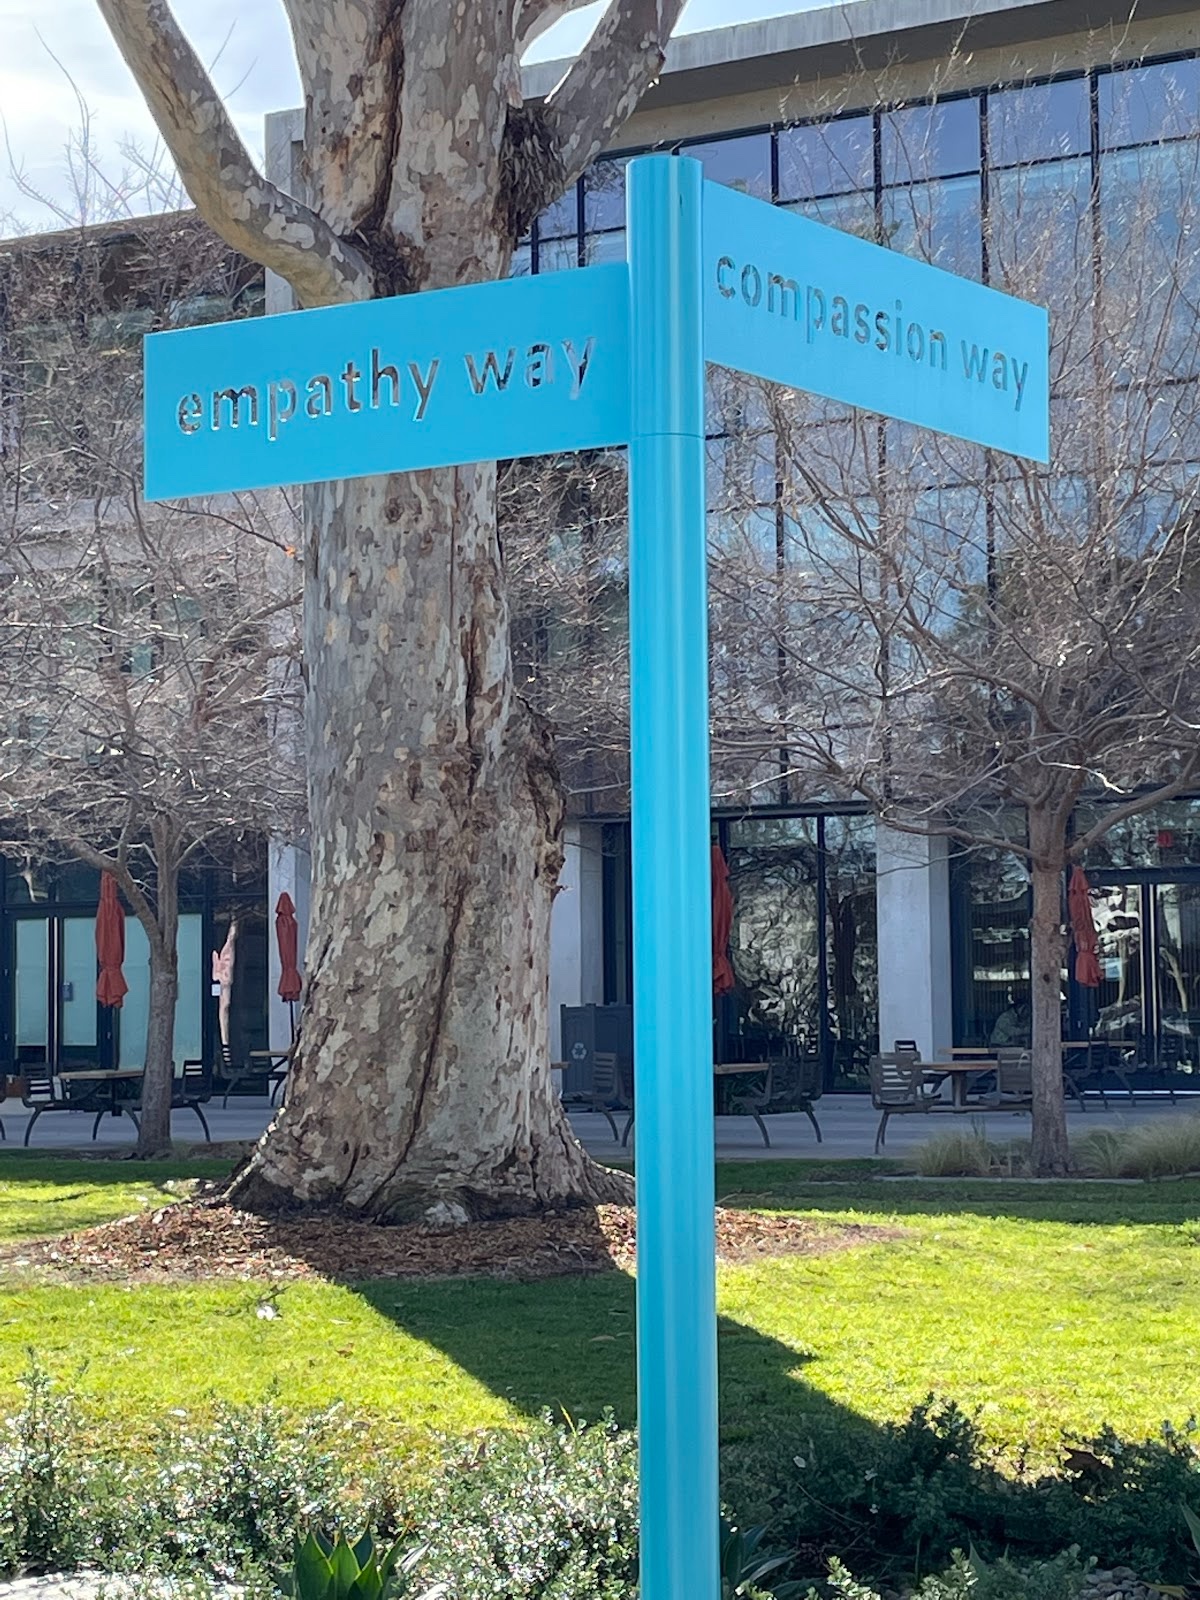 Intersection of Empathy Way &amp; Compassion Way at UCSD